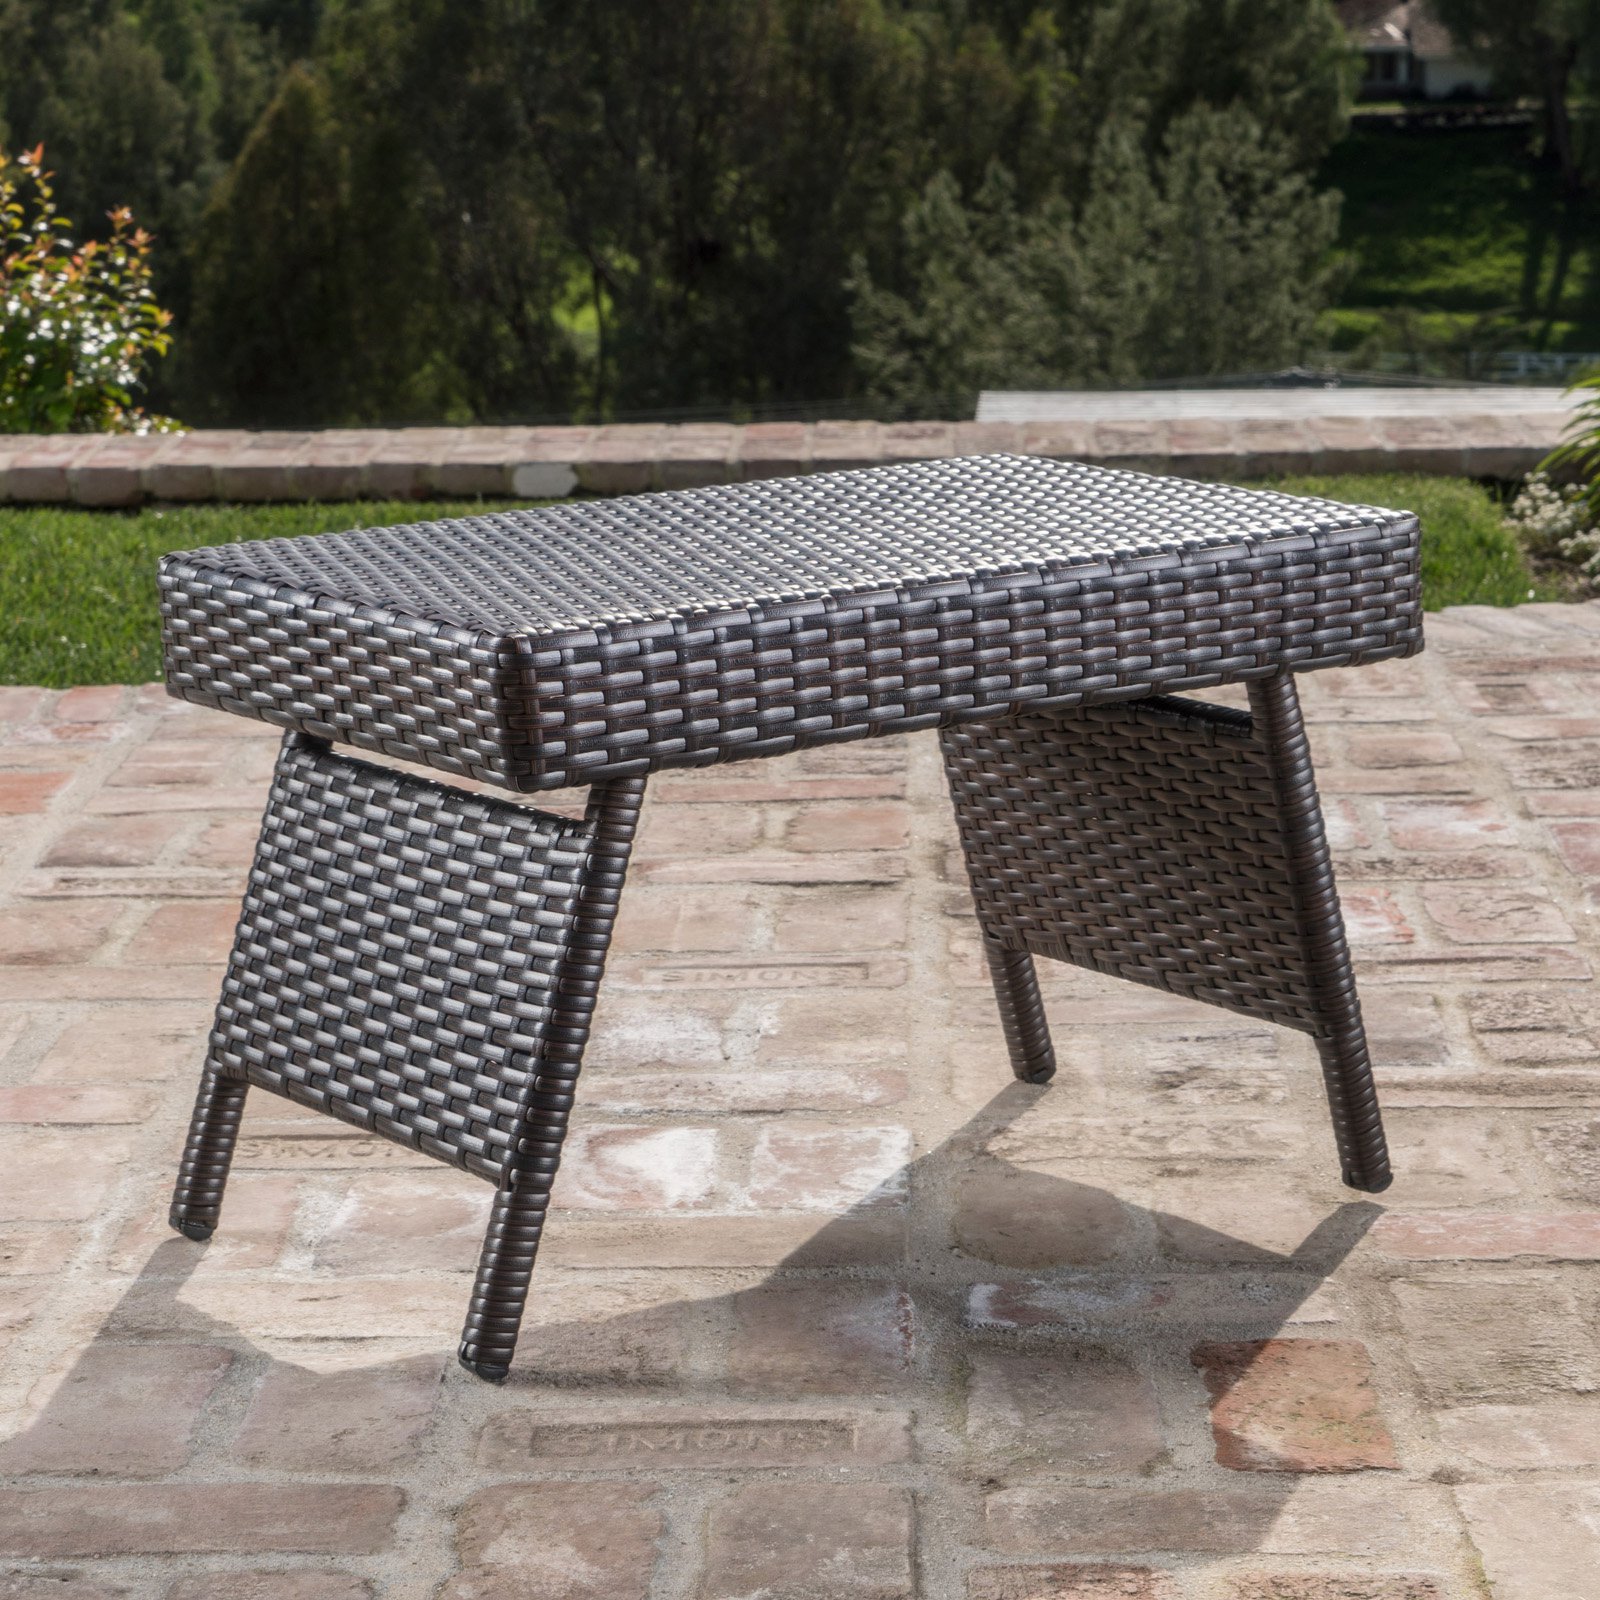 Thira Outdoor Wicker End Table - image 1 of 5